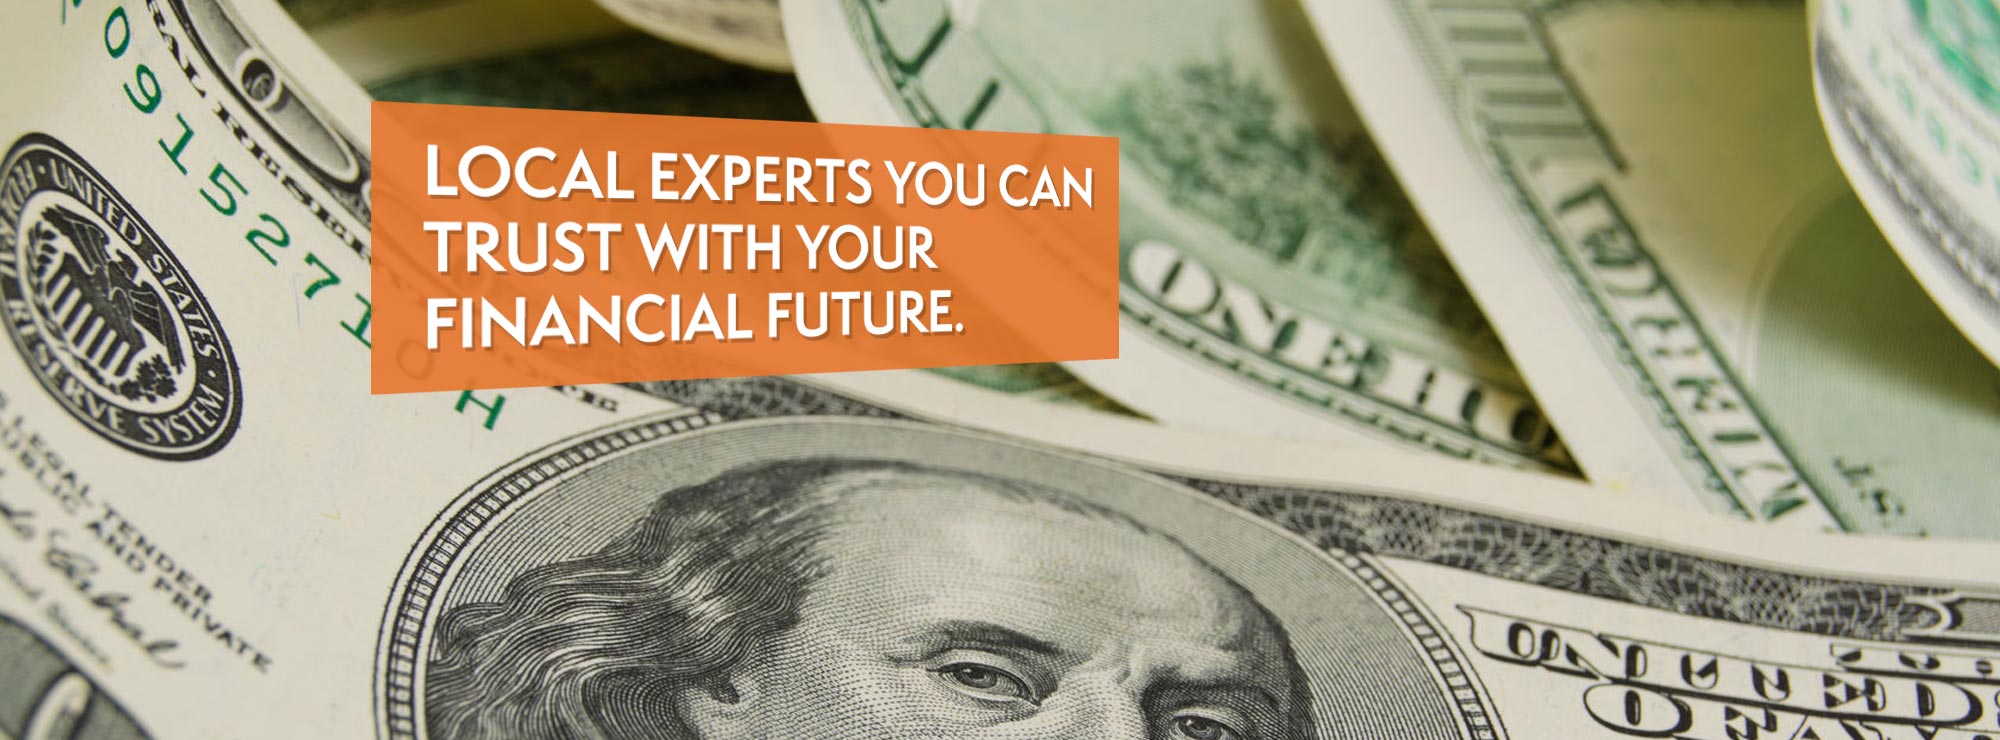 Local Experts You Can Trust With You Financial Future